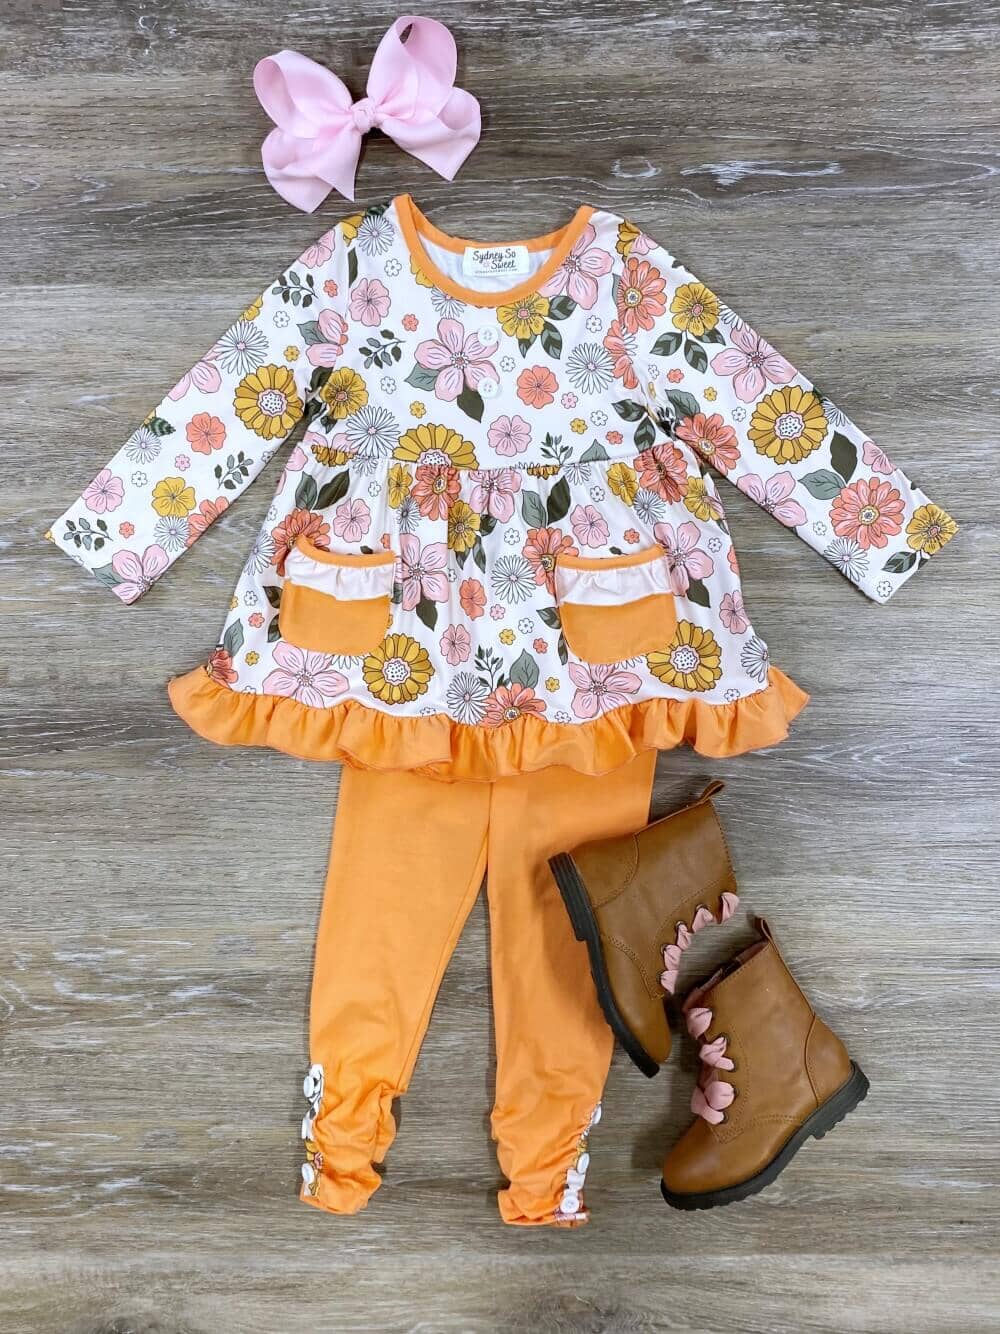 Retro Floral Fall Garden Girls Leggings Outfit 2T